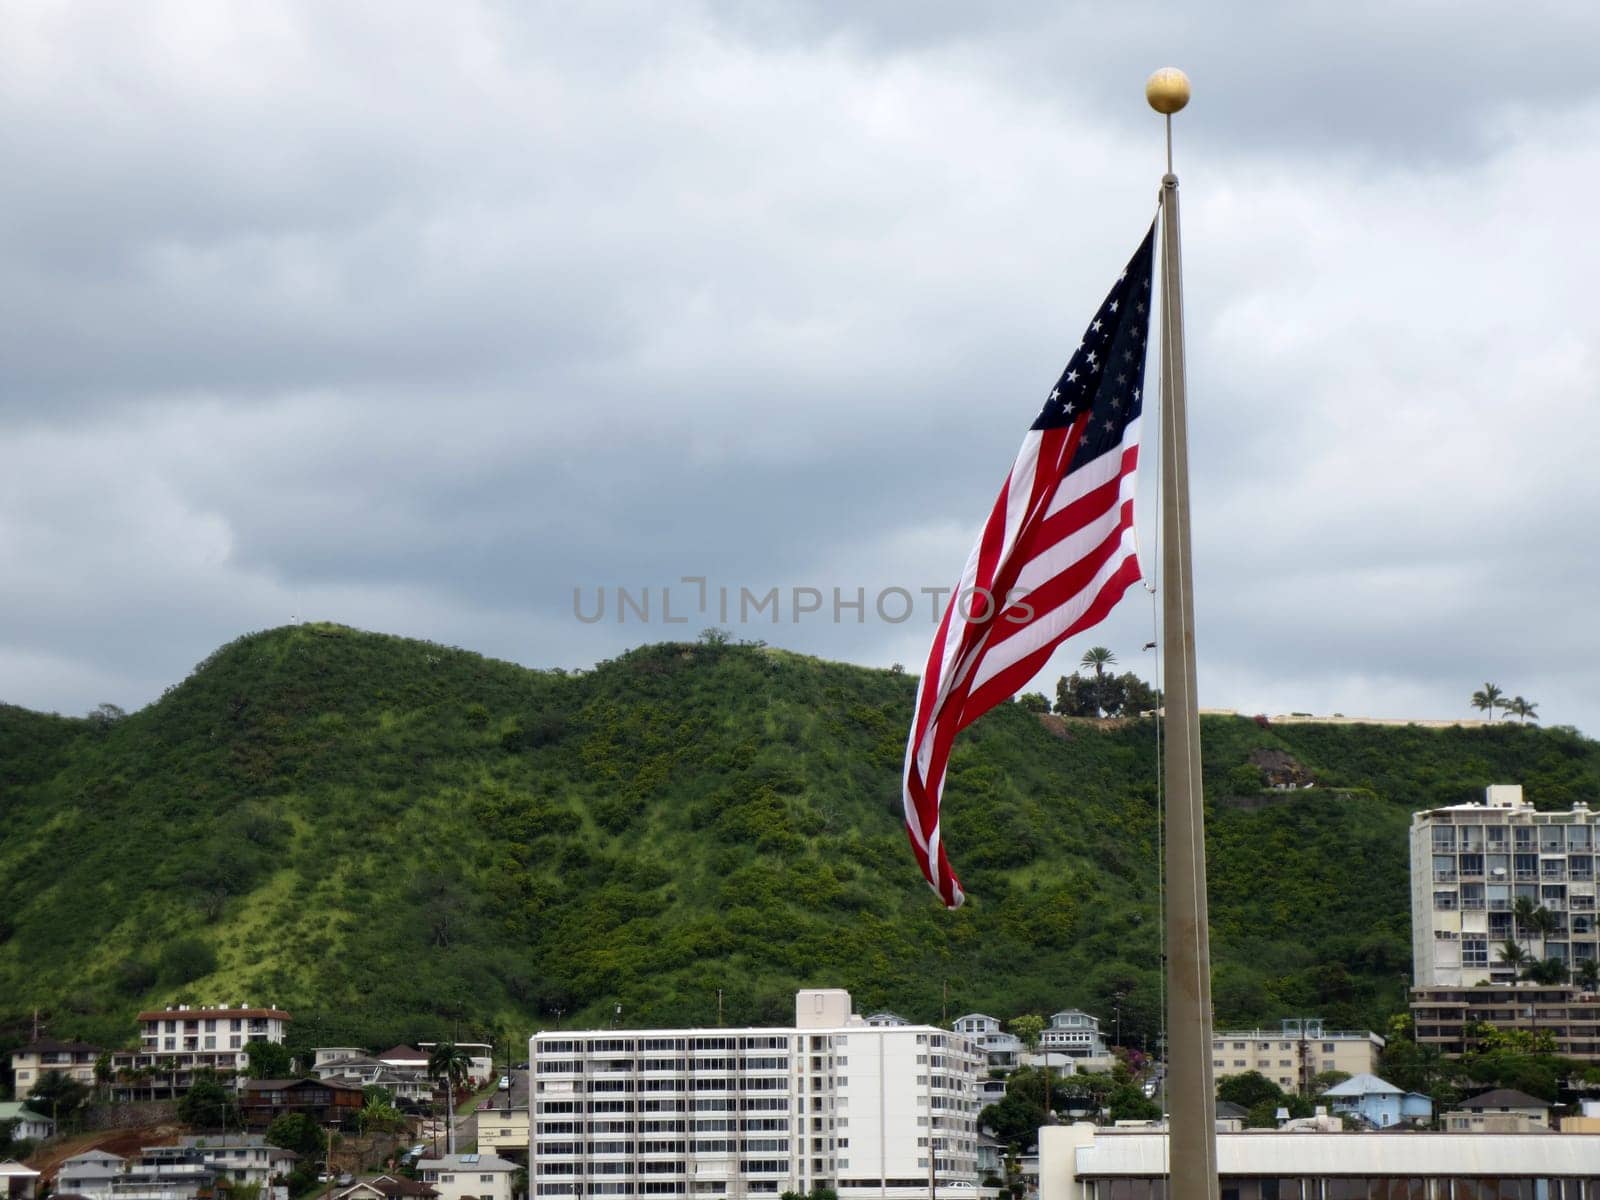 Honolulu - March 15, 2013: American flag flying on a flagpole in front of Punchbowl, a volcanic crater and a national memorial cemetery in Honolulu, Hawaii. The flag is at full mast and is waving in the wind. The background consists of a mountainous landscape with buildings and trees. The sky is overcast.